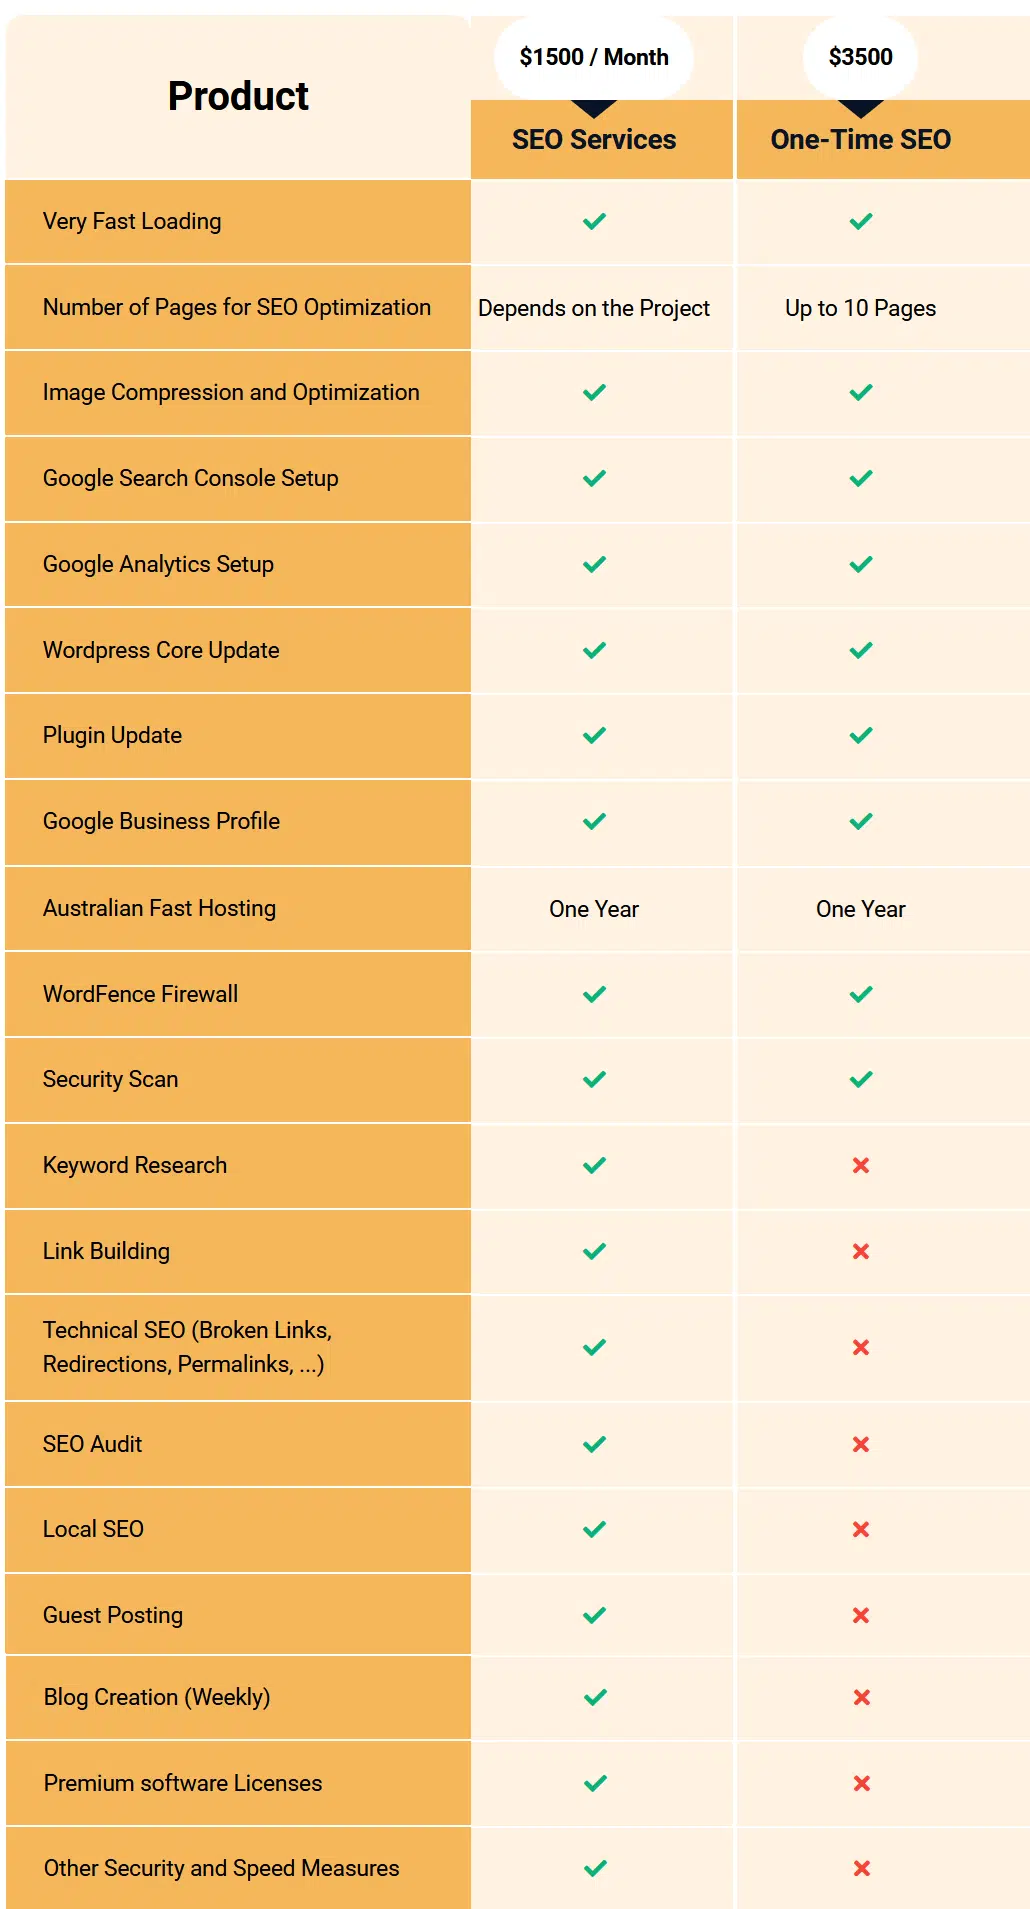 SEO services pricing comparison table. Full services with monthly fee of $1500, and limited one time services with price of $3500 once.